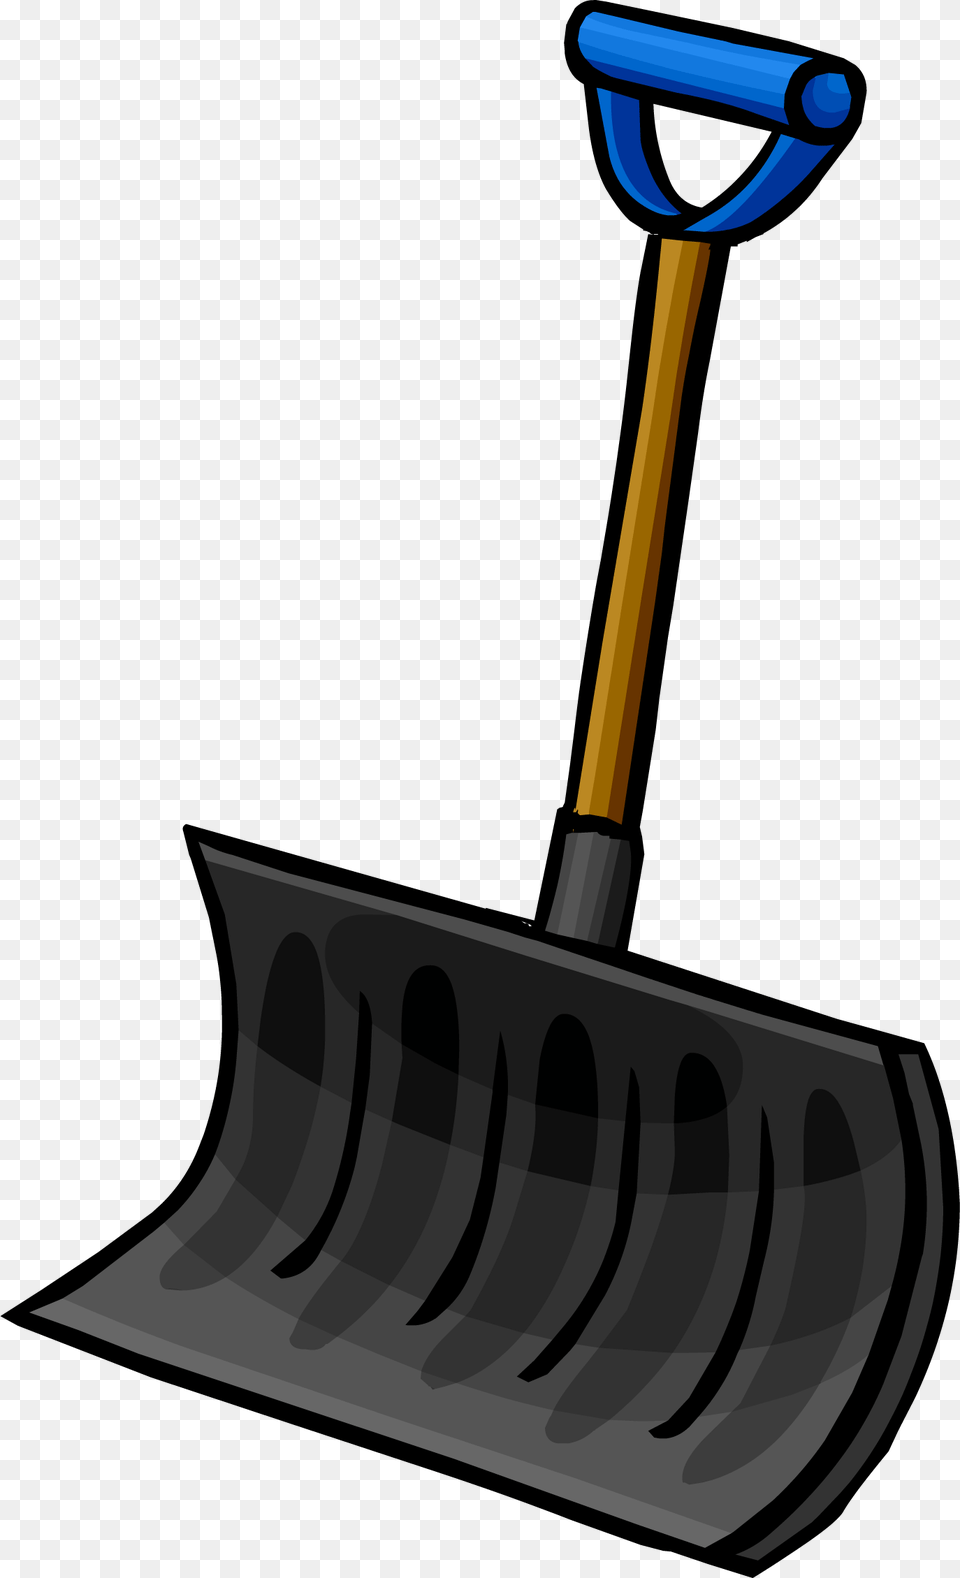 Snow Club Penguin Wiki Snow Shovel Clipart, Device, Tool, Smoke Pipe, Blade Free Transparent Png